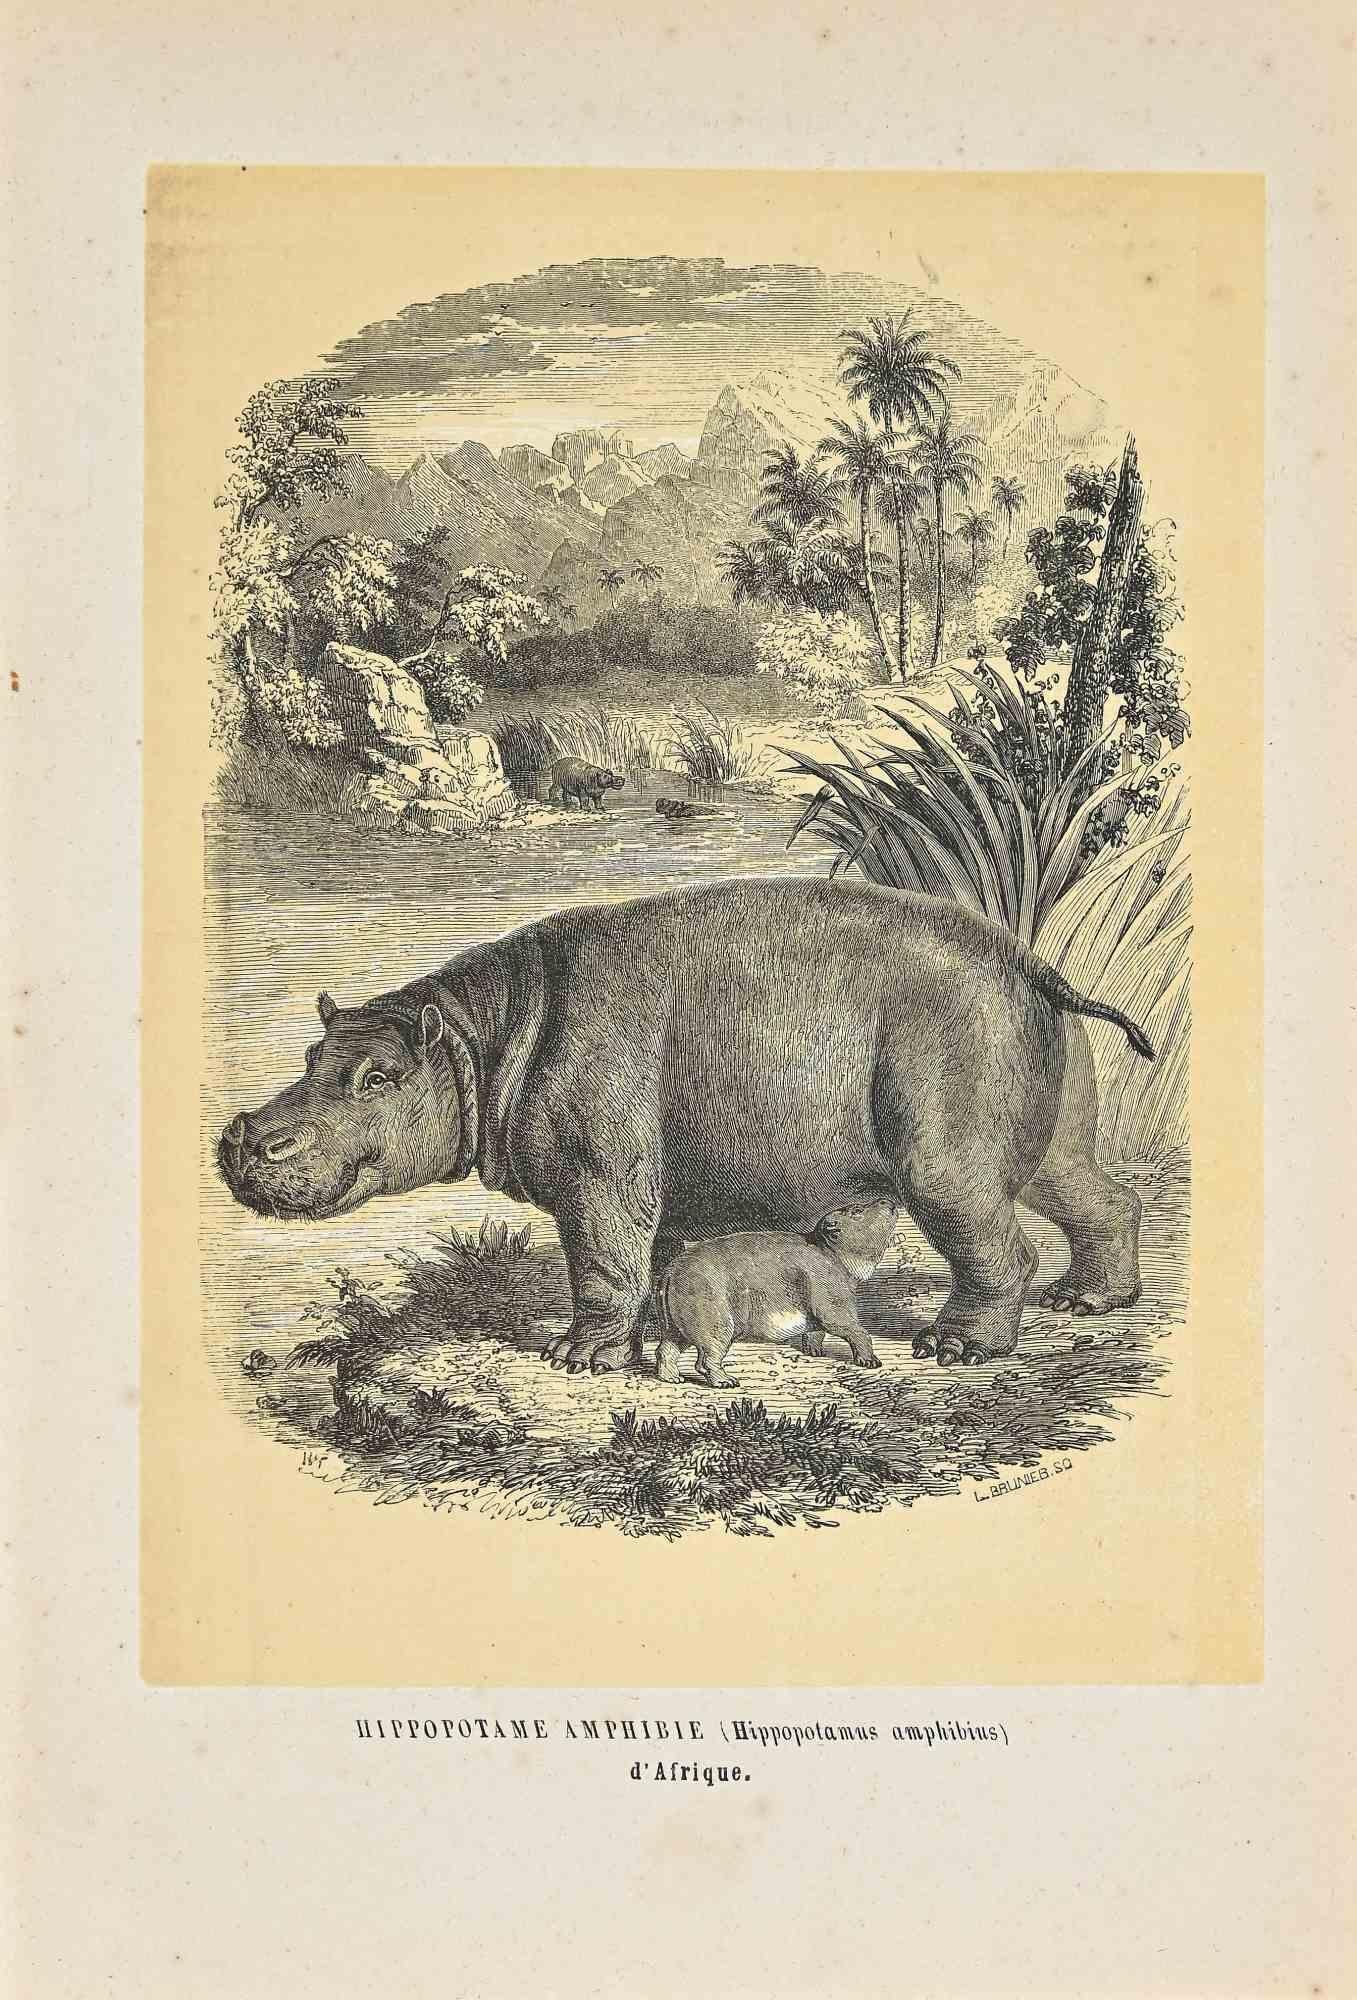 Hippopotamus Amphibious an original lithograph with stencil on ivory-colored paper, realized by Paul Gervais (1816-1879). The artwork is from The Series of "Les Trois Règnes de la Nature", and was published in 1854.

Good conditions.

Titled on the